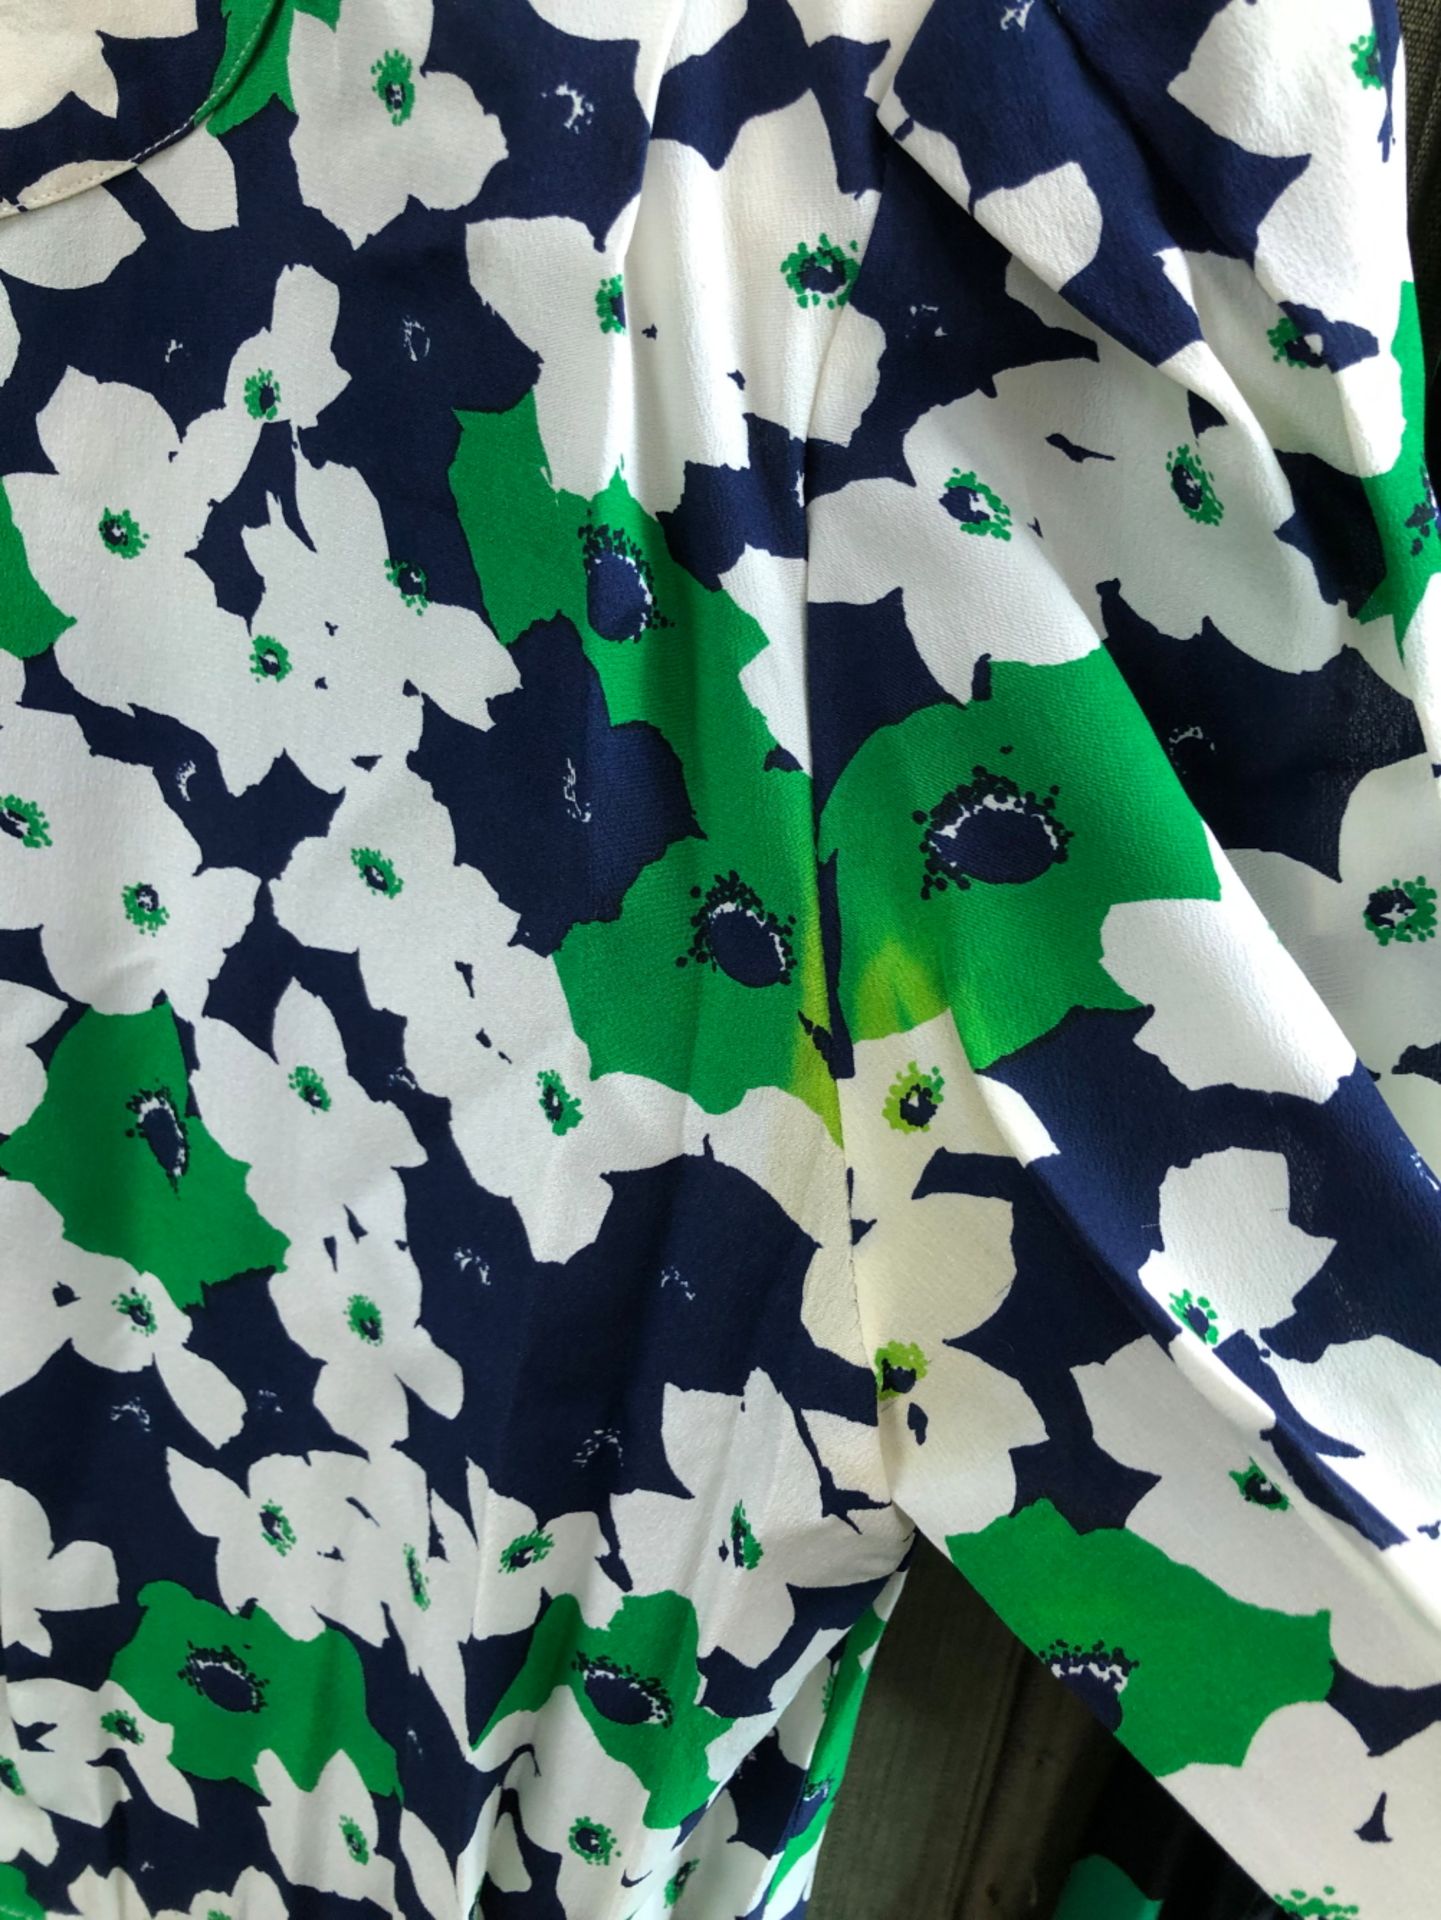 A CELINE PARIS BLUE, WHITE AND GREEN FLORAL PRINT DRESS SIZE 40, AND A FURTHER SCOOP BACK DRESS OF - Image 11 of 12